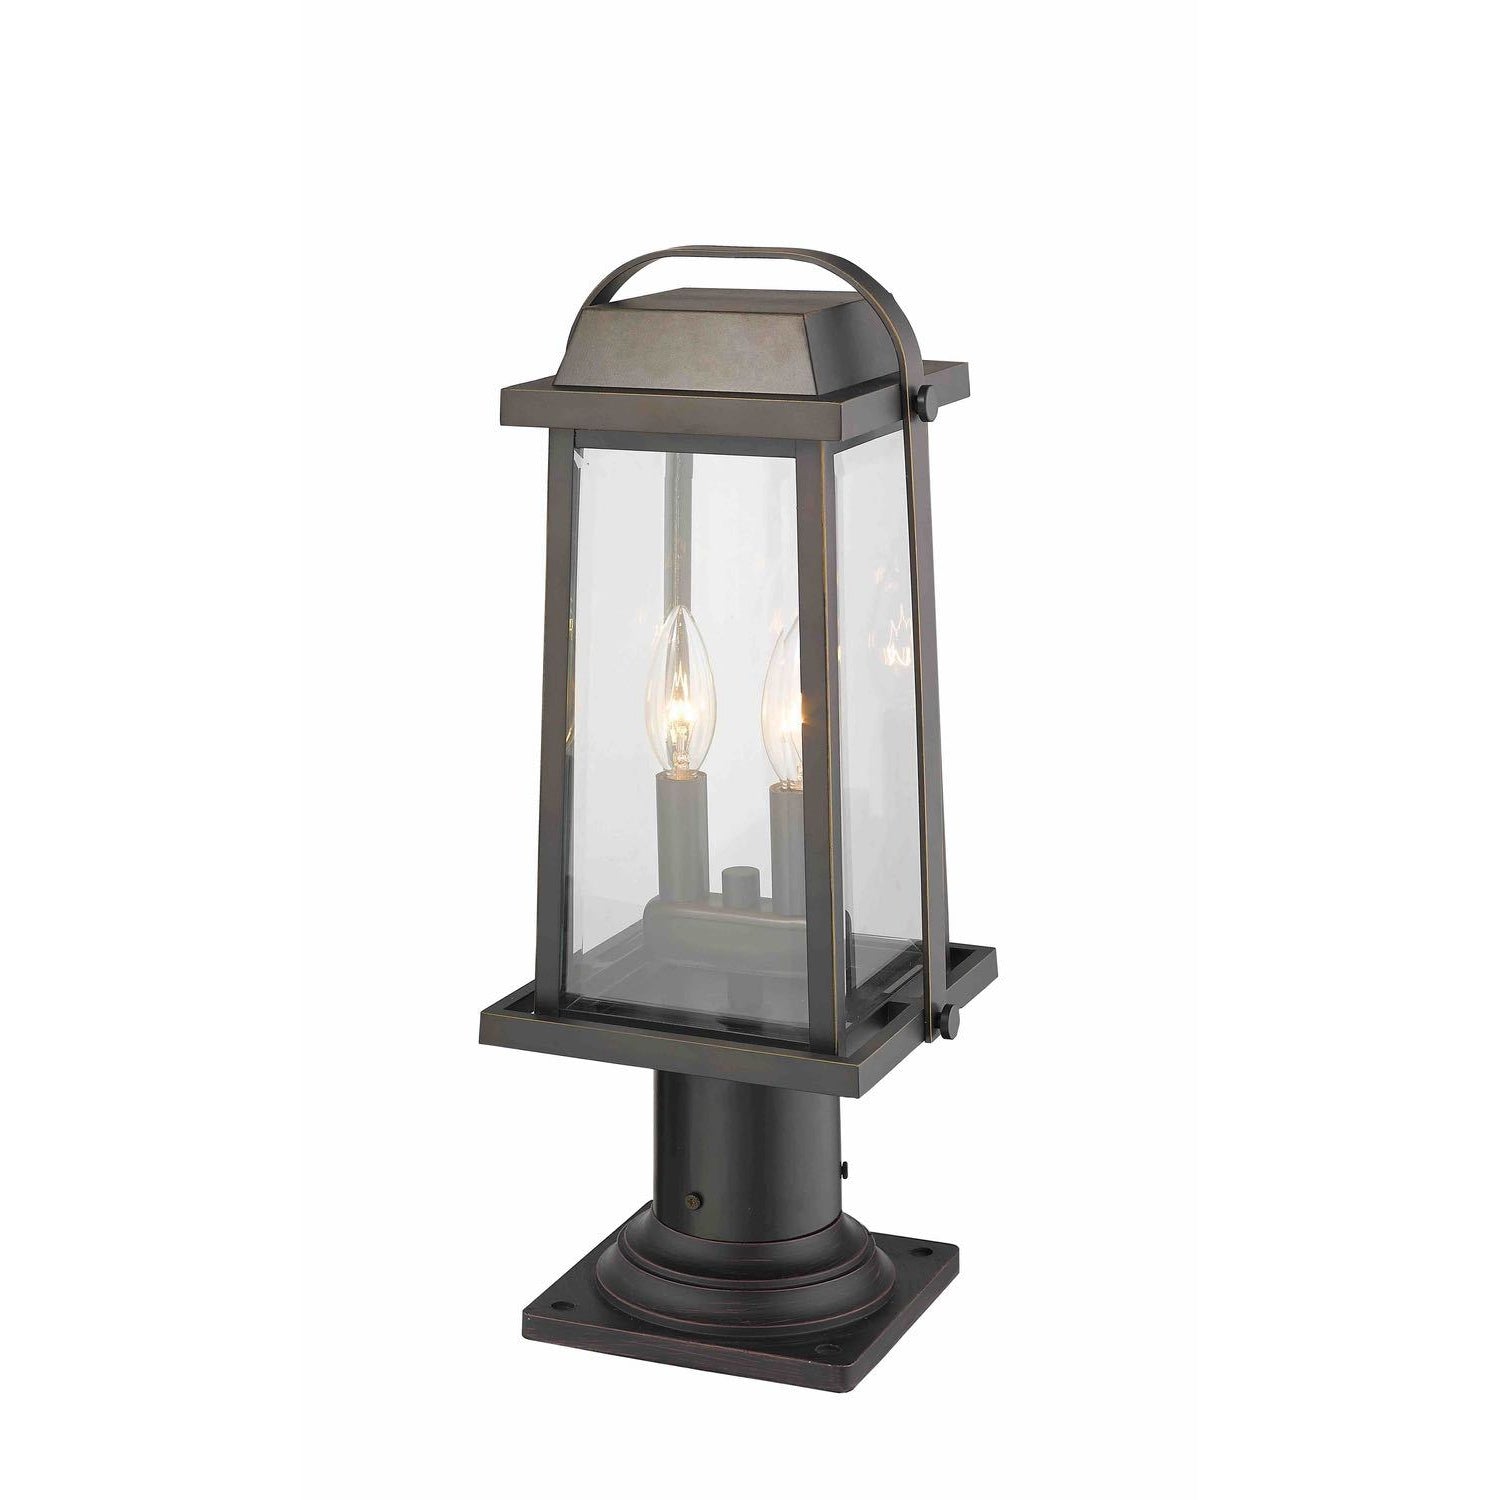 Millworks Pier Mount Oil Rubbed Bronze